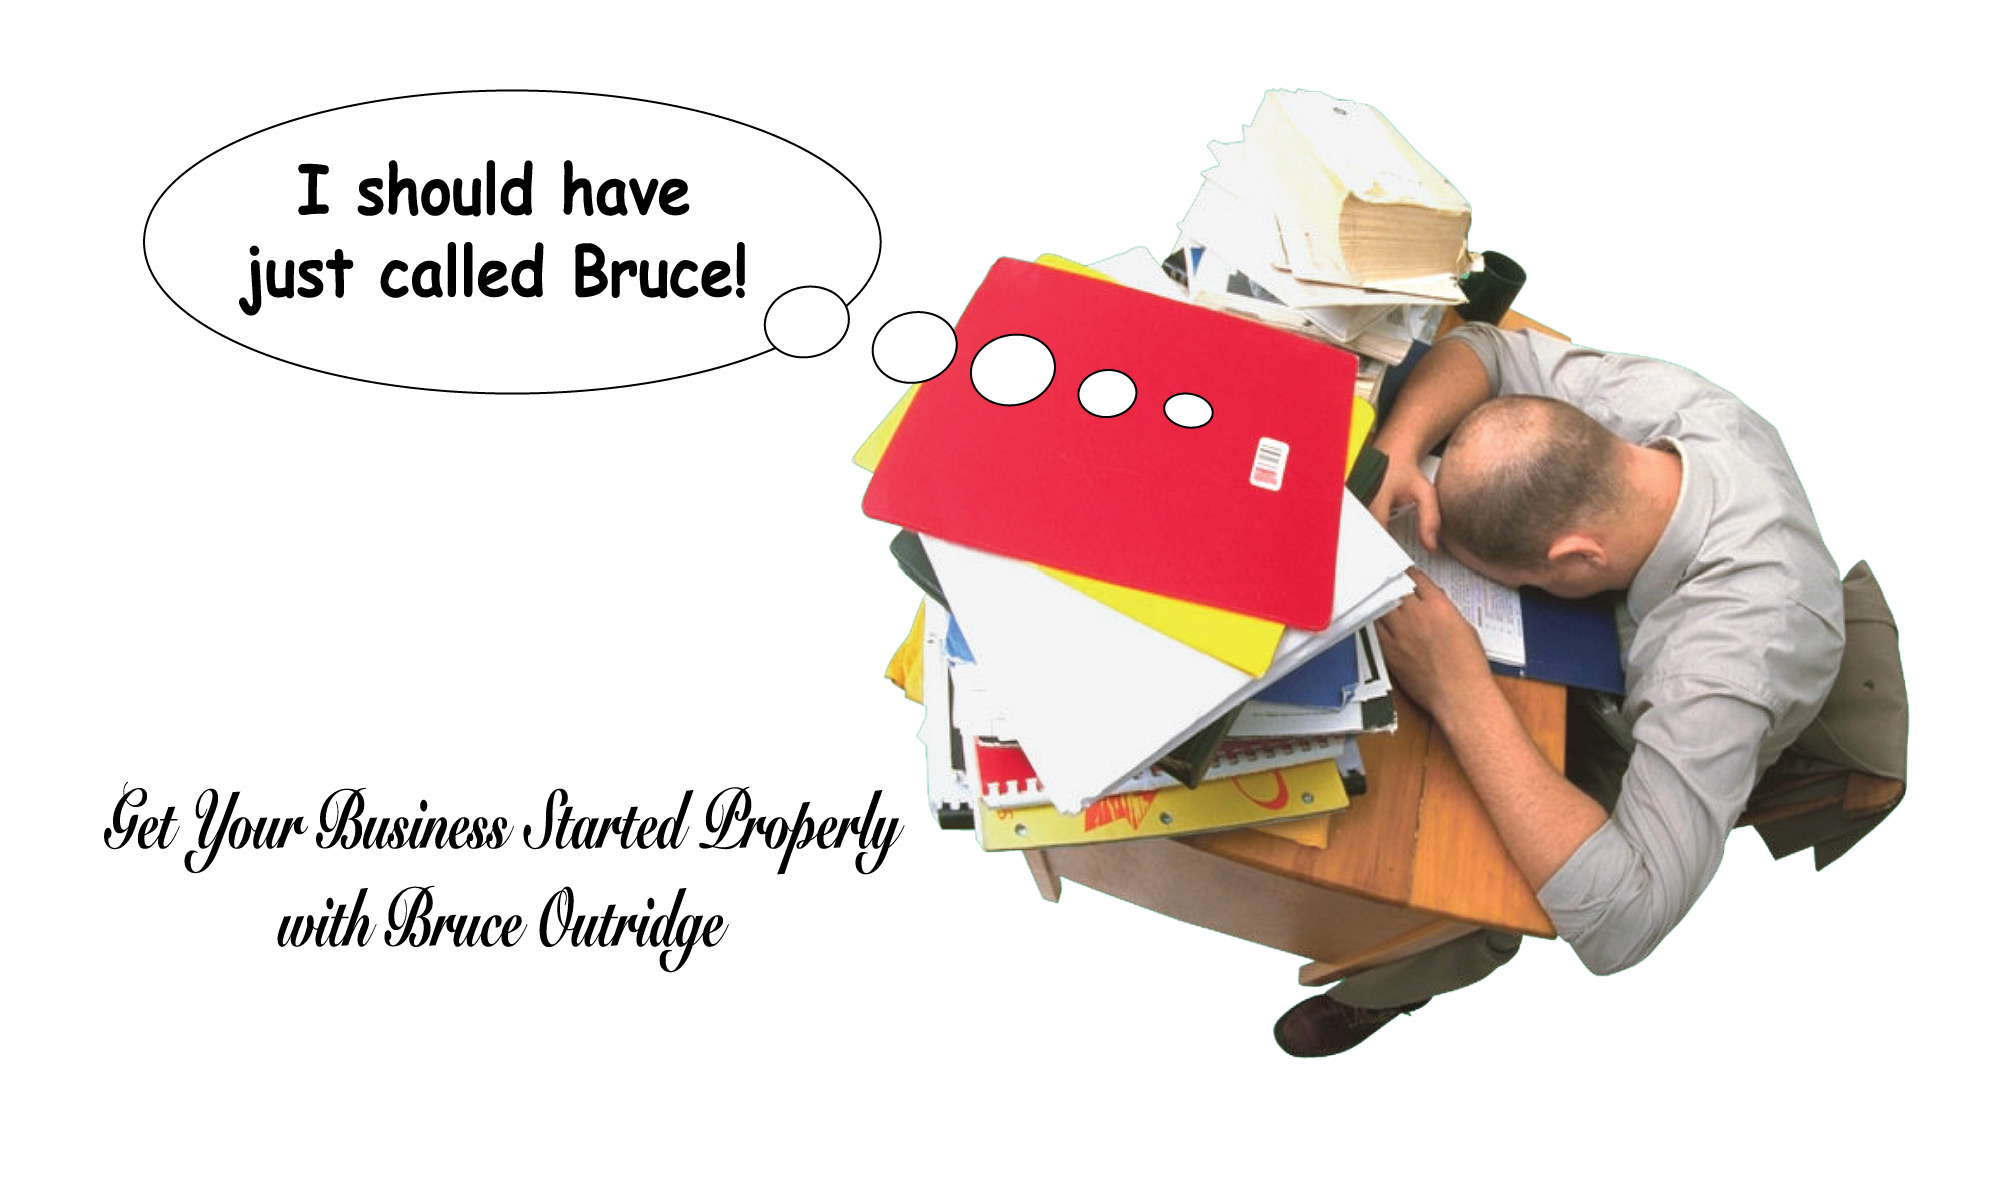 Start your business with Bruce Outridge